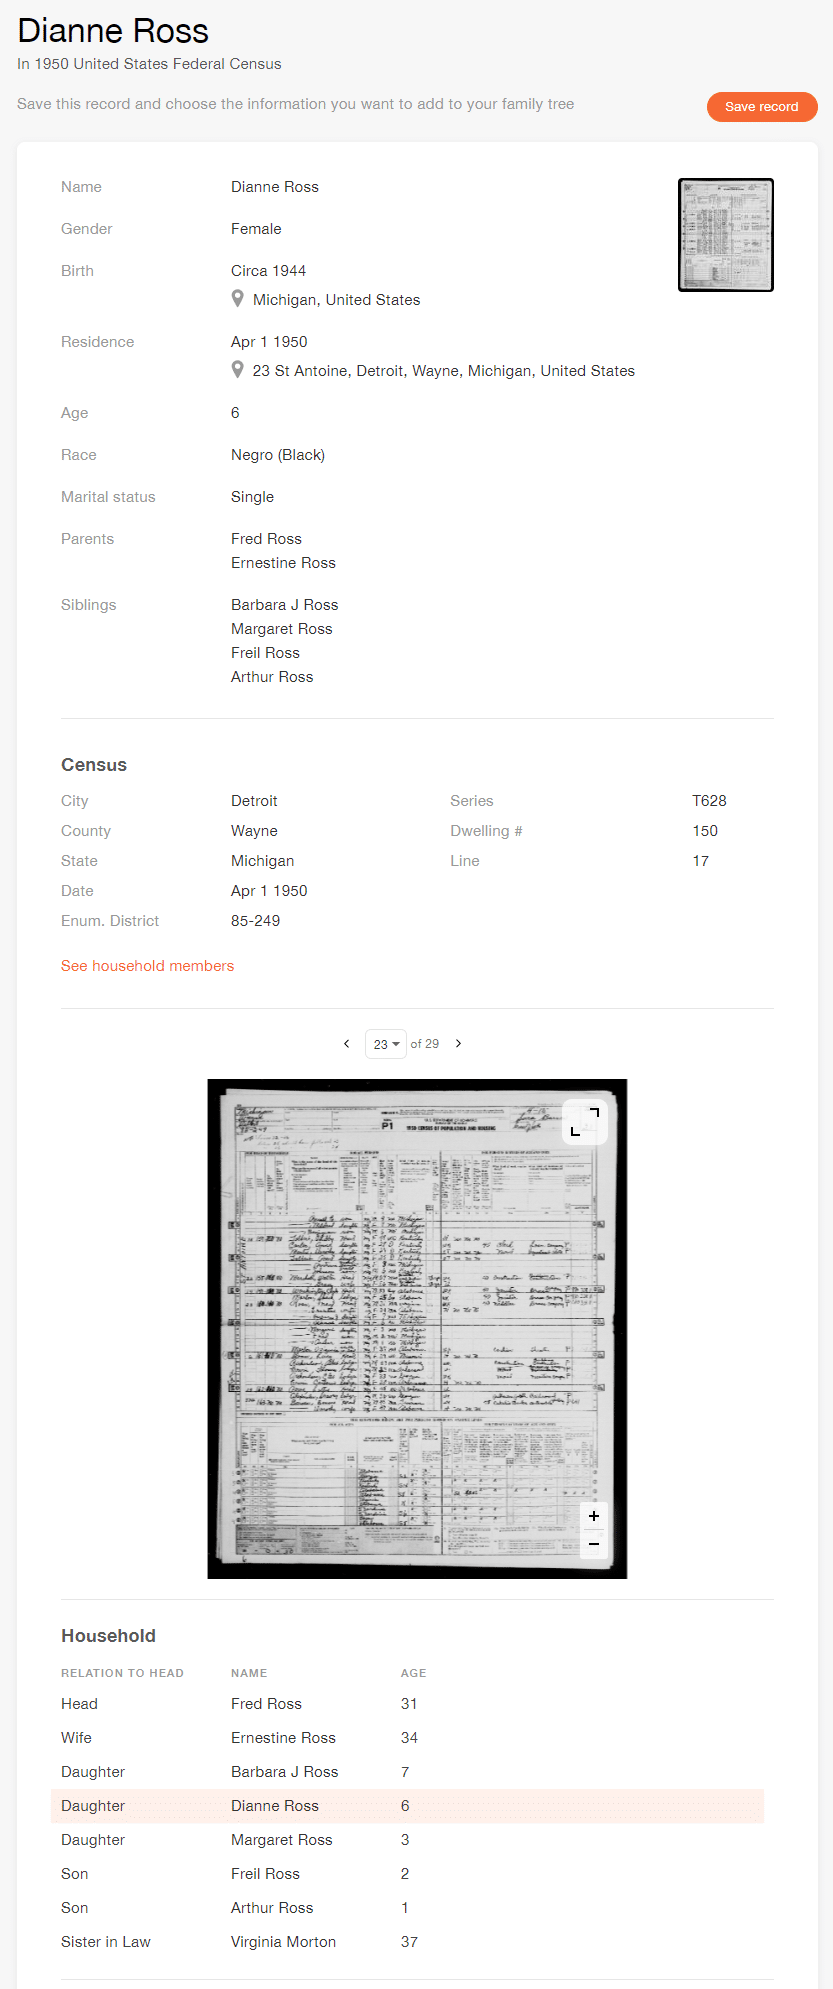 Census Record of Diana Ross [Credit: MyHeritage 1950 United States Federal Census]